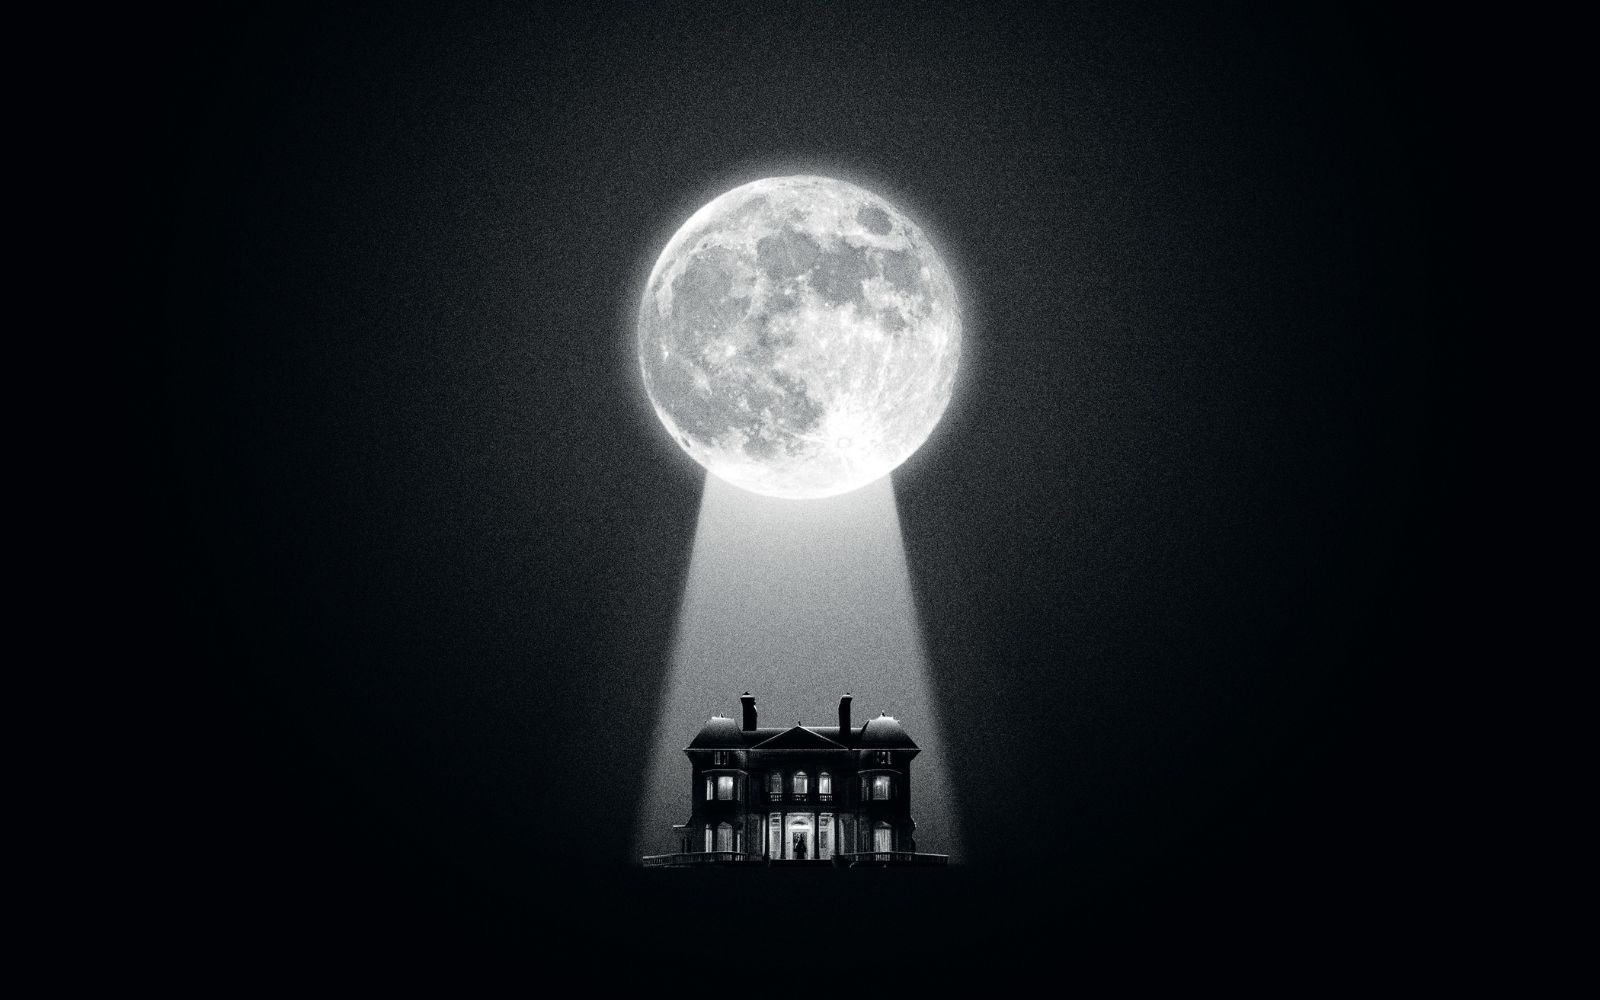 Promotional artwork depicting a house lit by moonlight in the shape of a keyhole